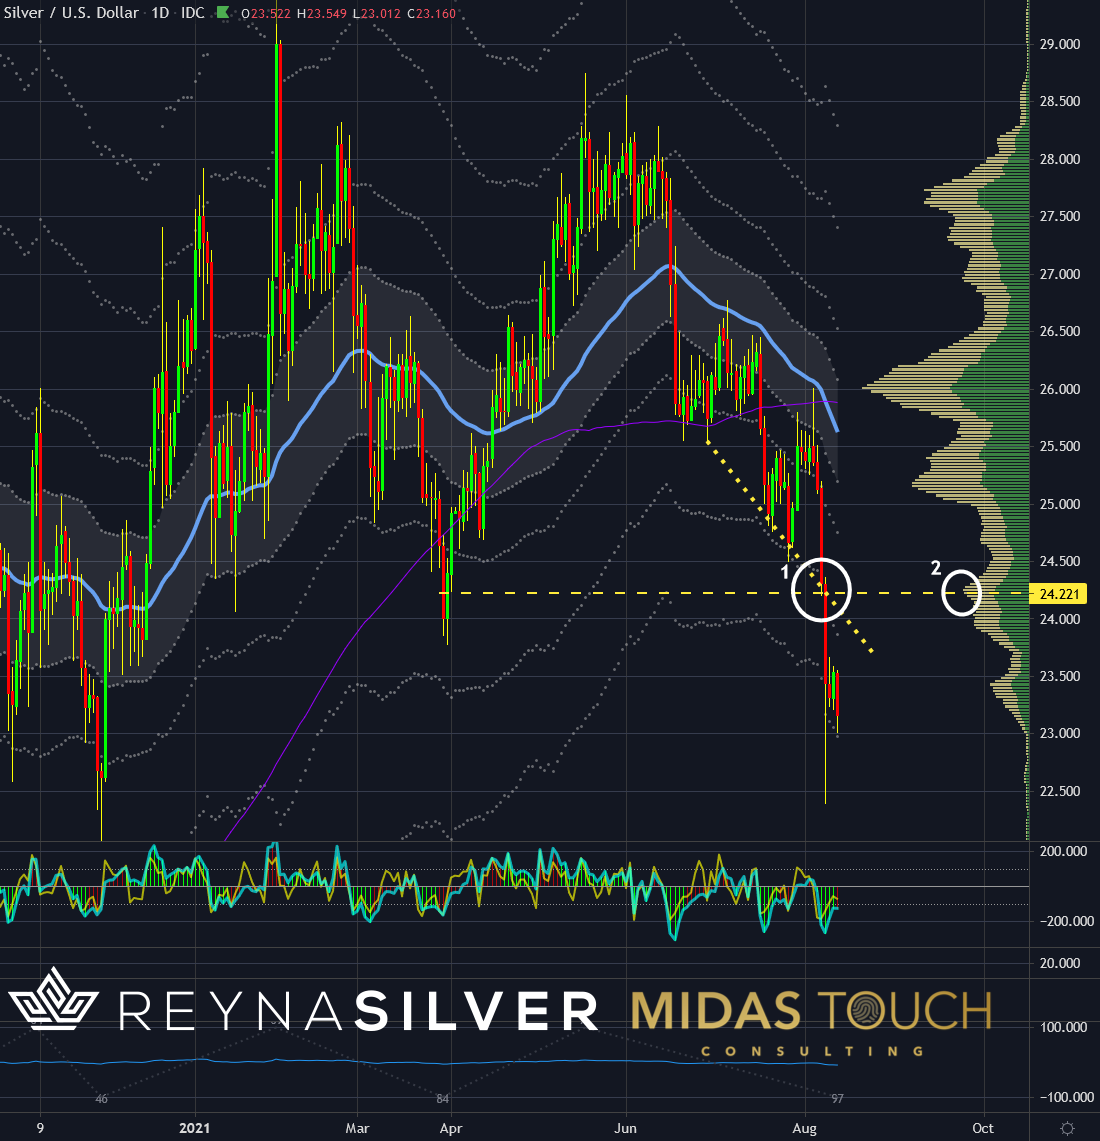 Silver in US-Dollar, daily chart as of August 13th, 2021. Silver, the value price spread